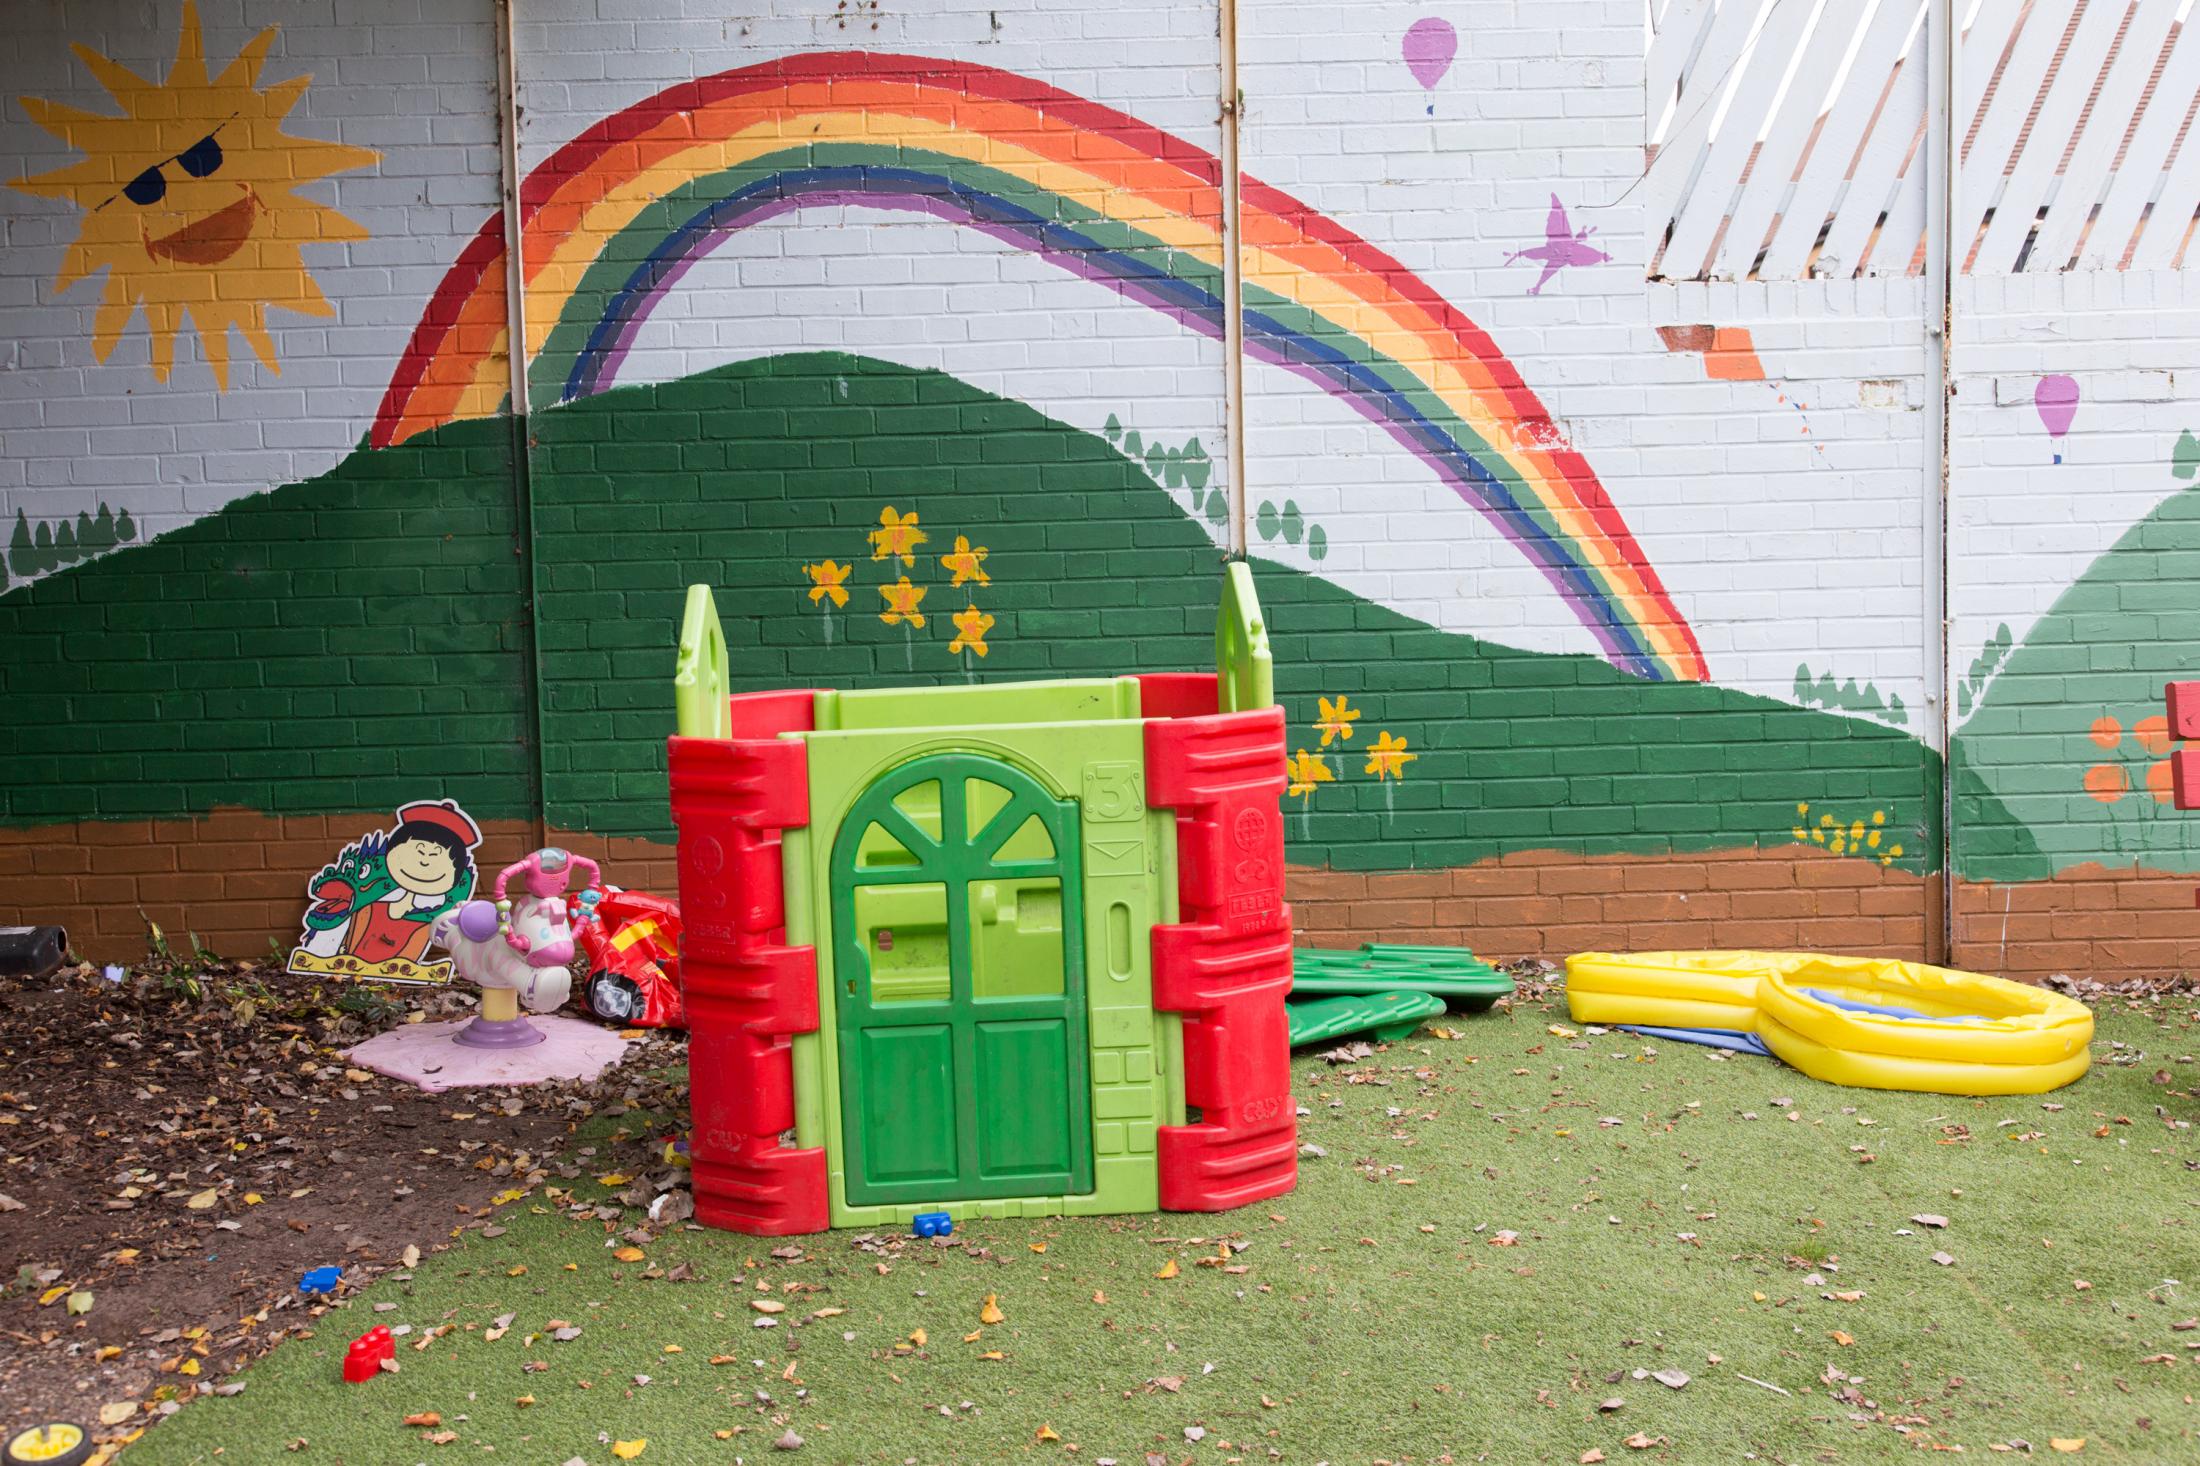 A Room of Their Own - Children’s play area, a refuge in the Black...